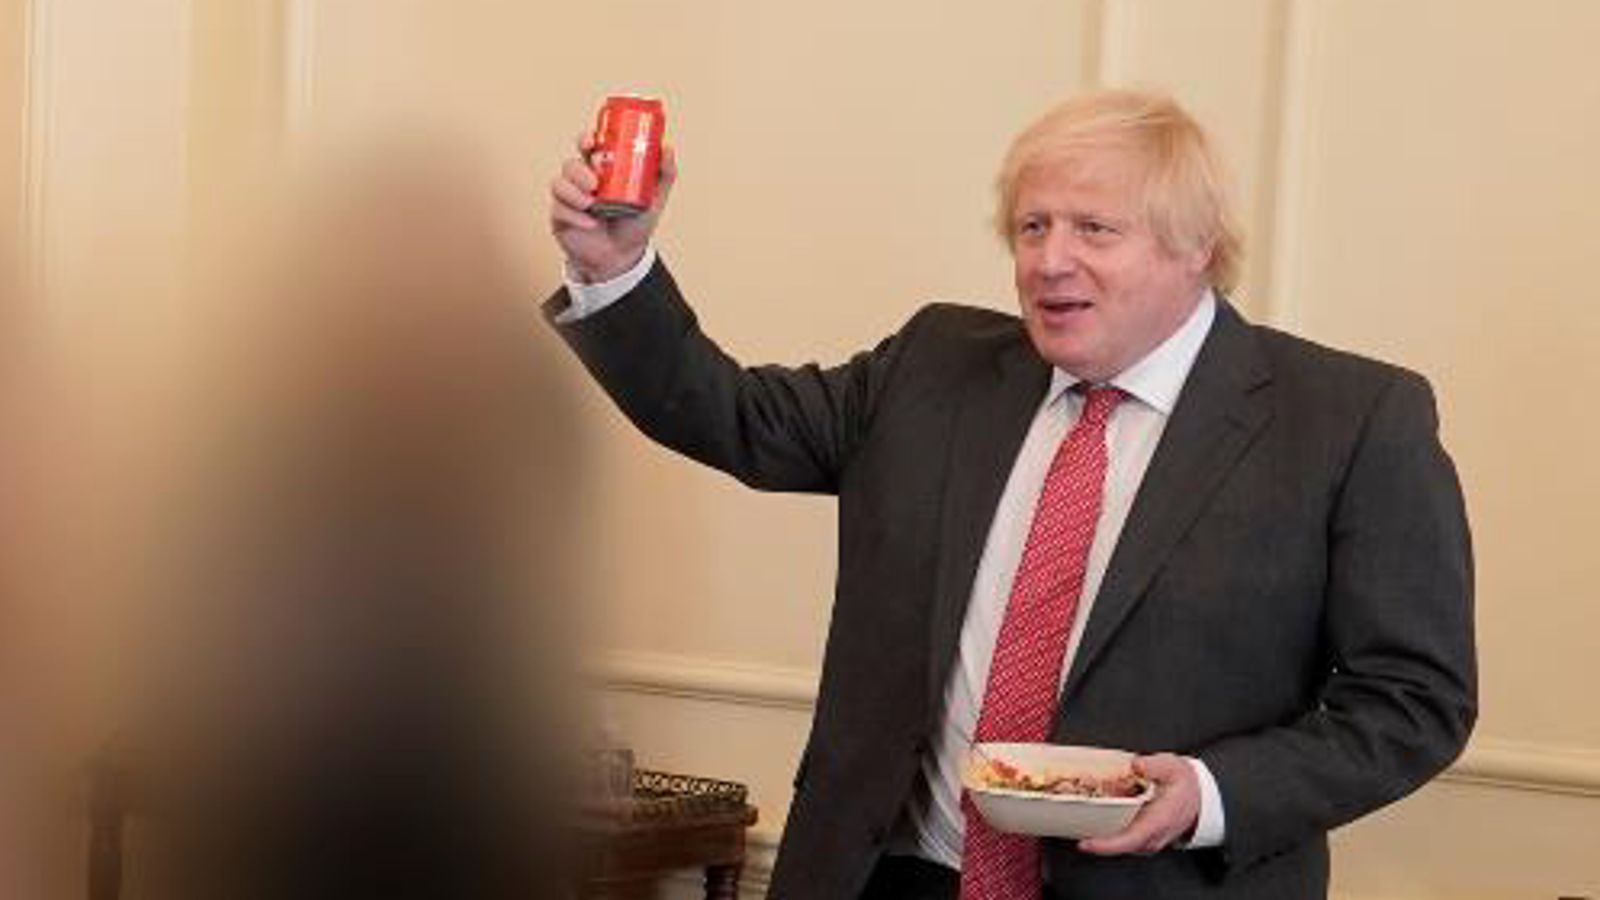 Boris Johnson's partygate bash dismissed as just 'soggy sandwiches and a slice of birthday cake' by ally